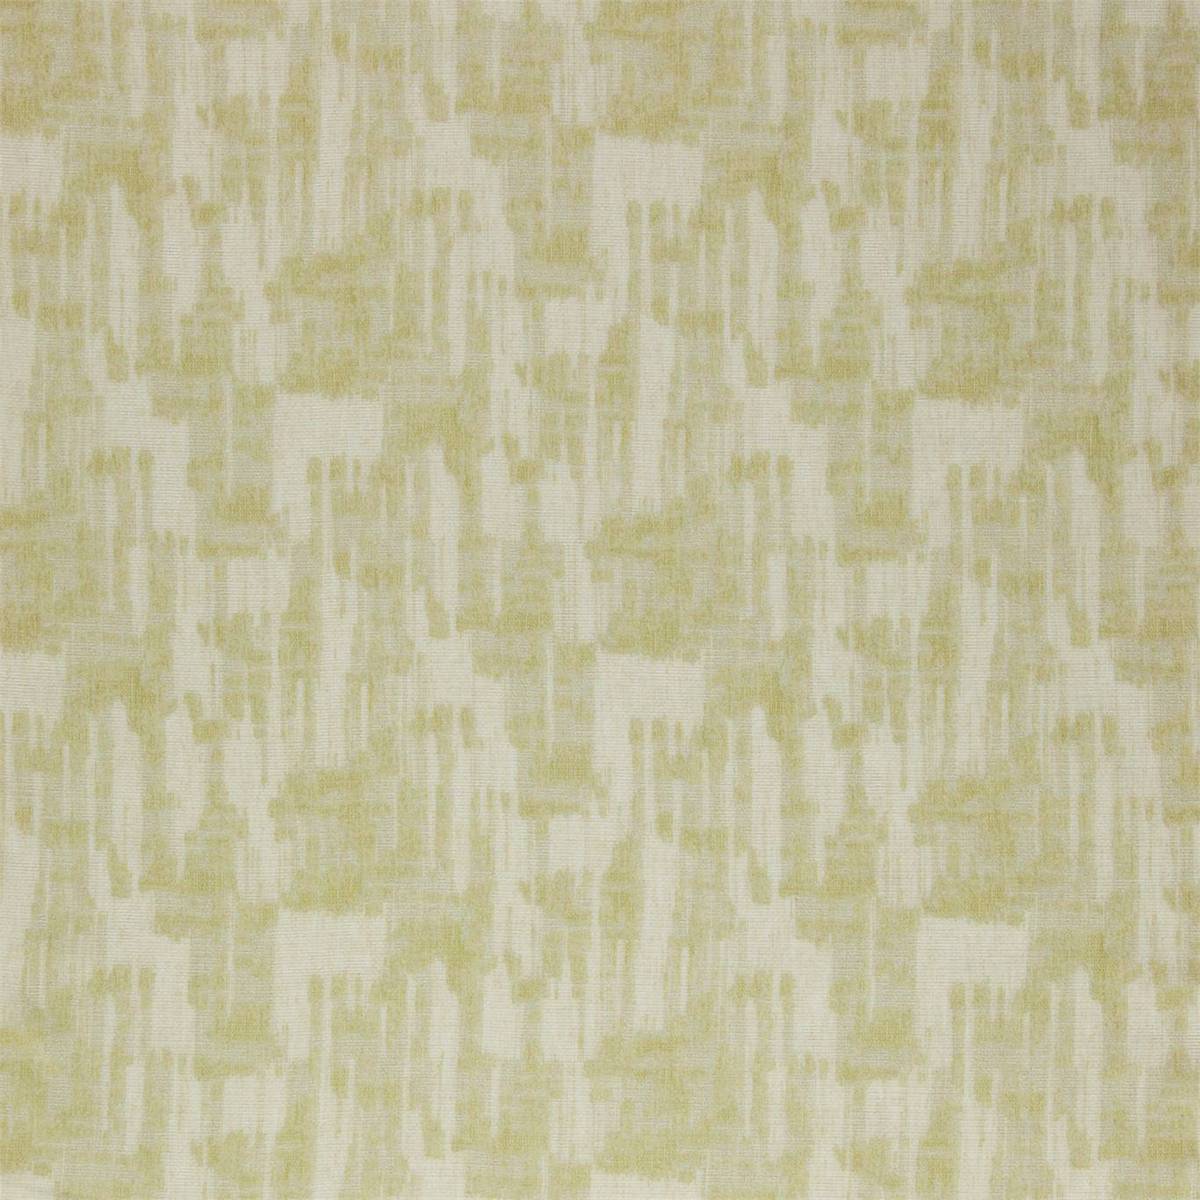 Refrain Linden Fabric by Harlequin